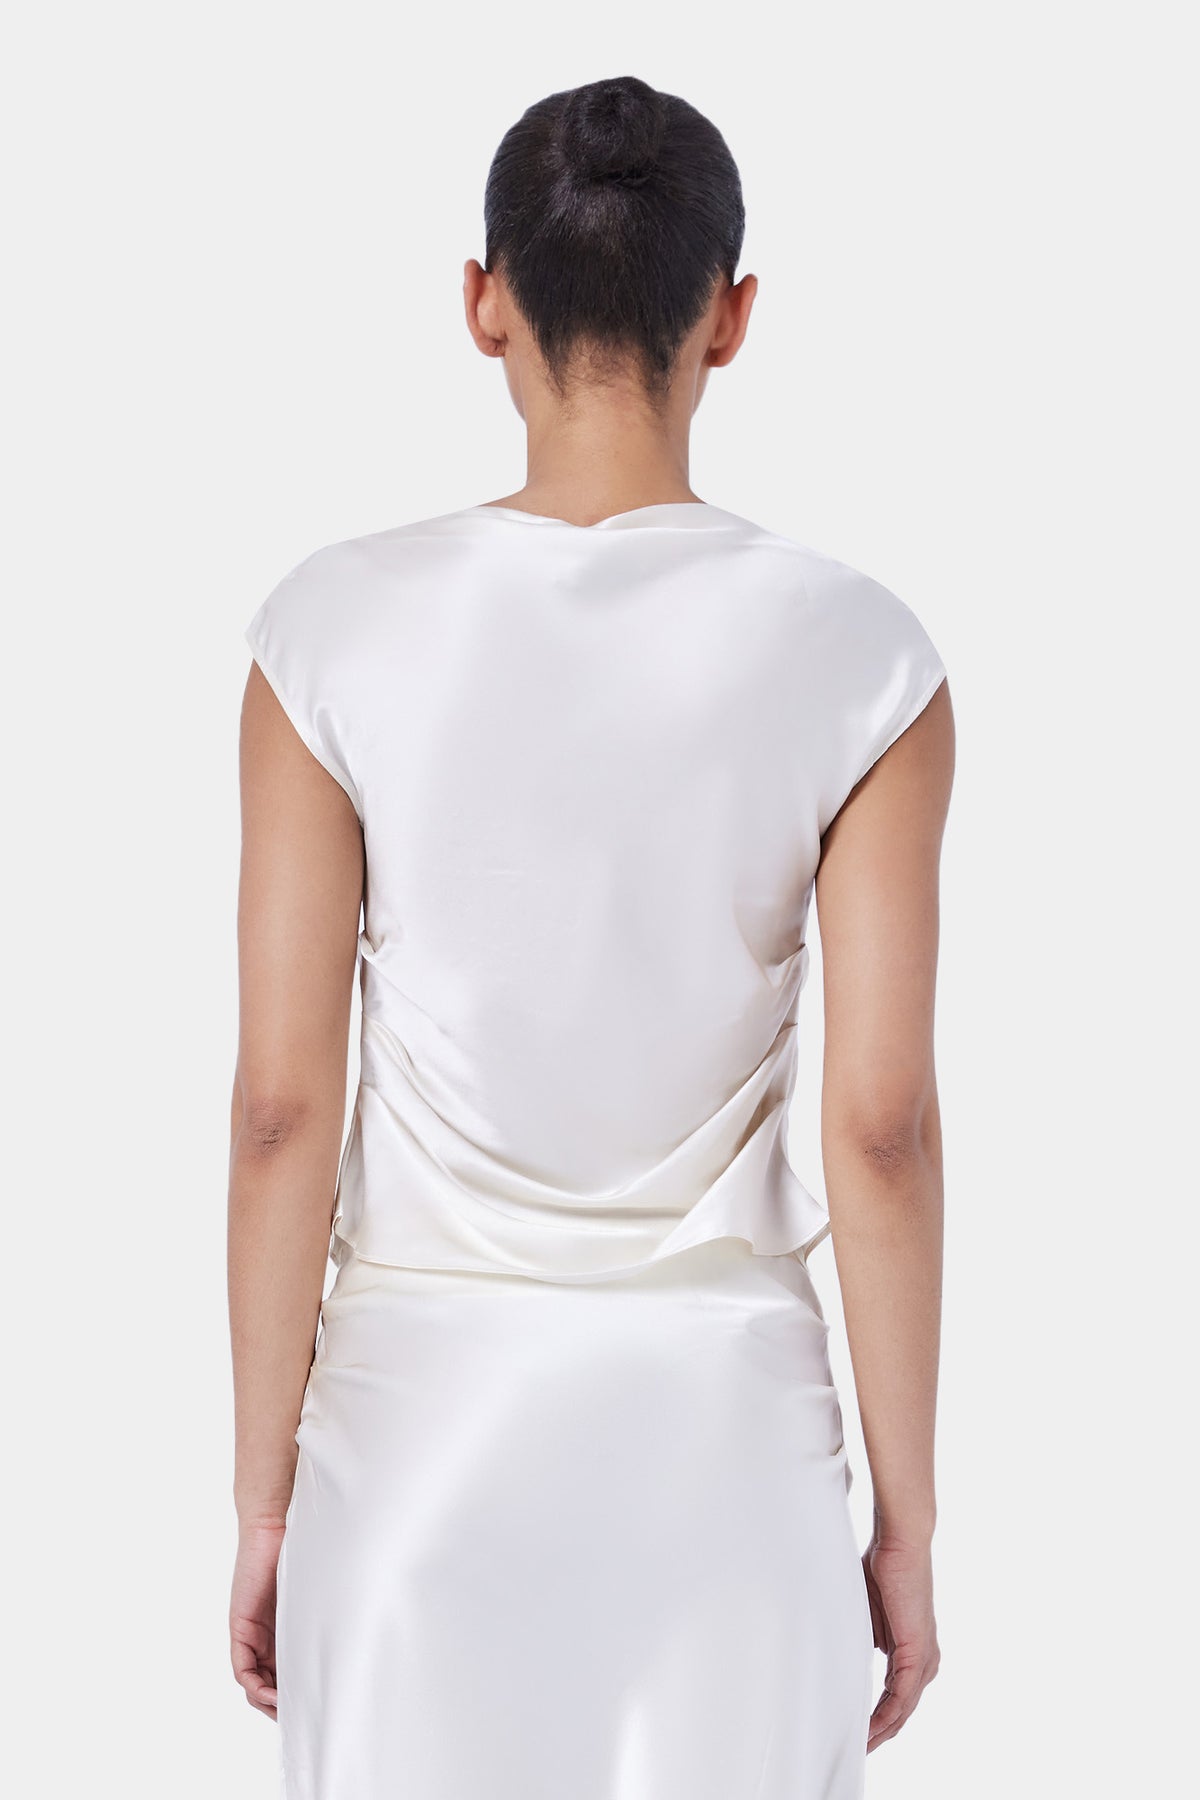 The Sleeveless Tucked Top By GINIA In Cream